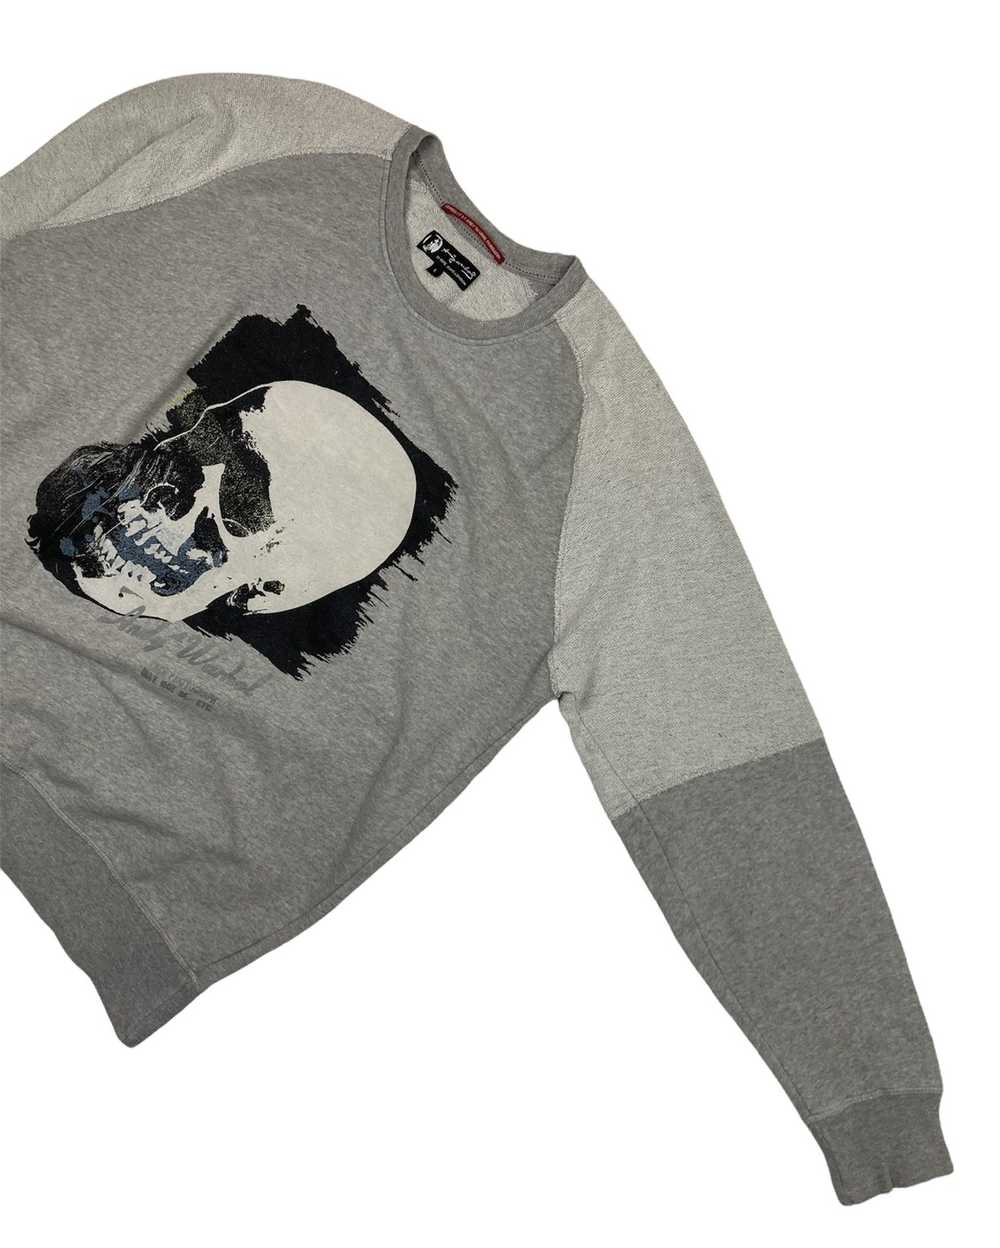 Andy Warhol × Pepe Jeans Andy Warhol Skull Sweater - image 3